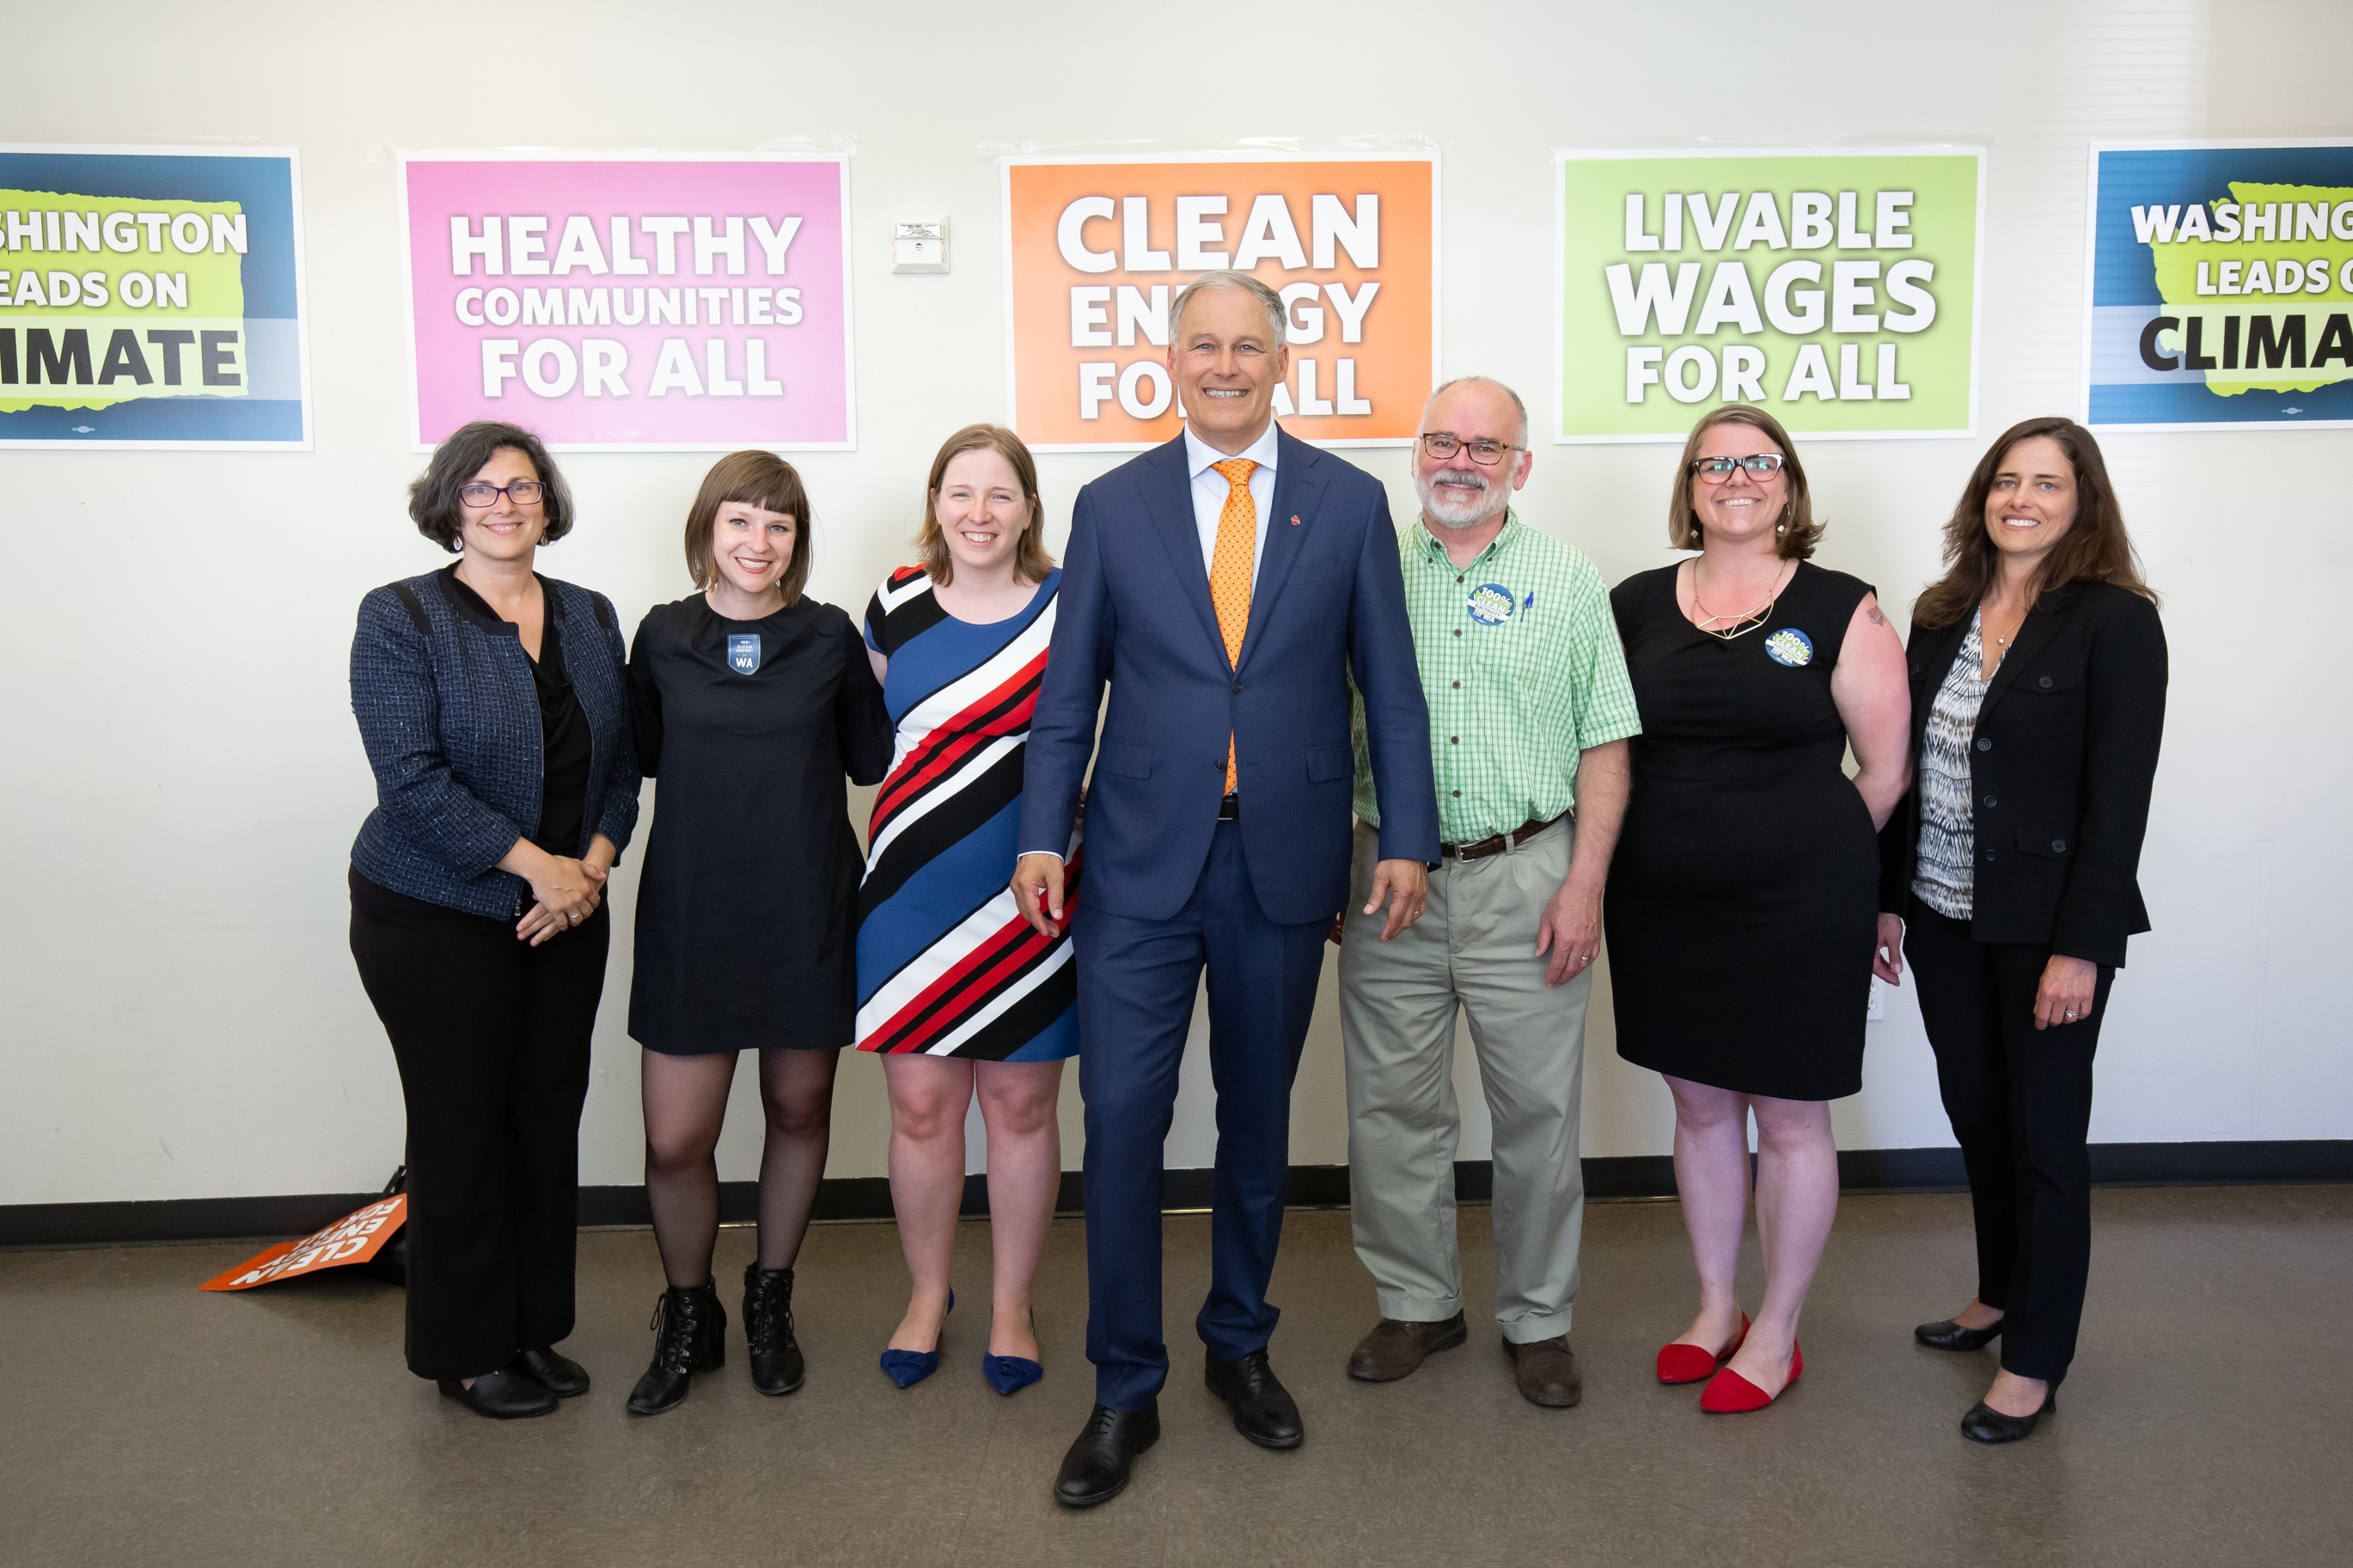 Gov. Inslee poses with Commerce staff at signing event